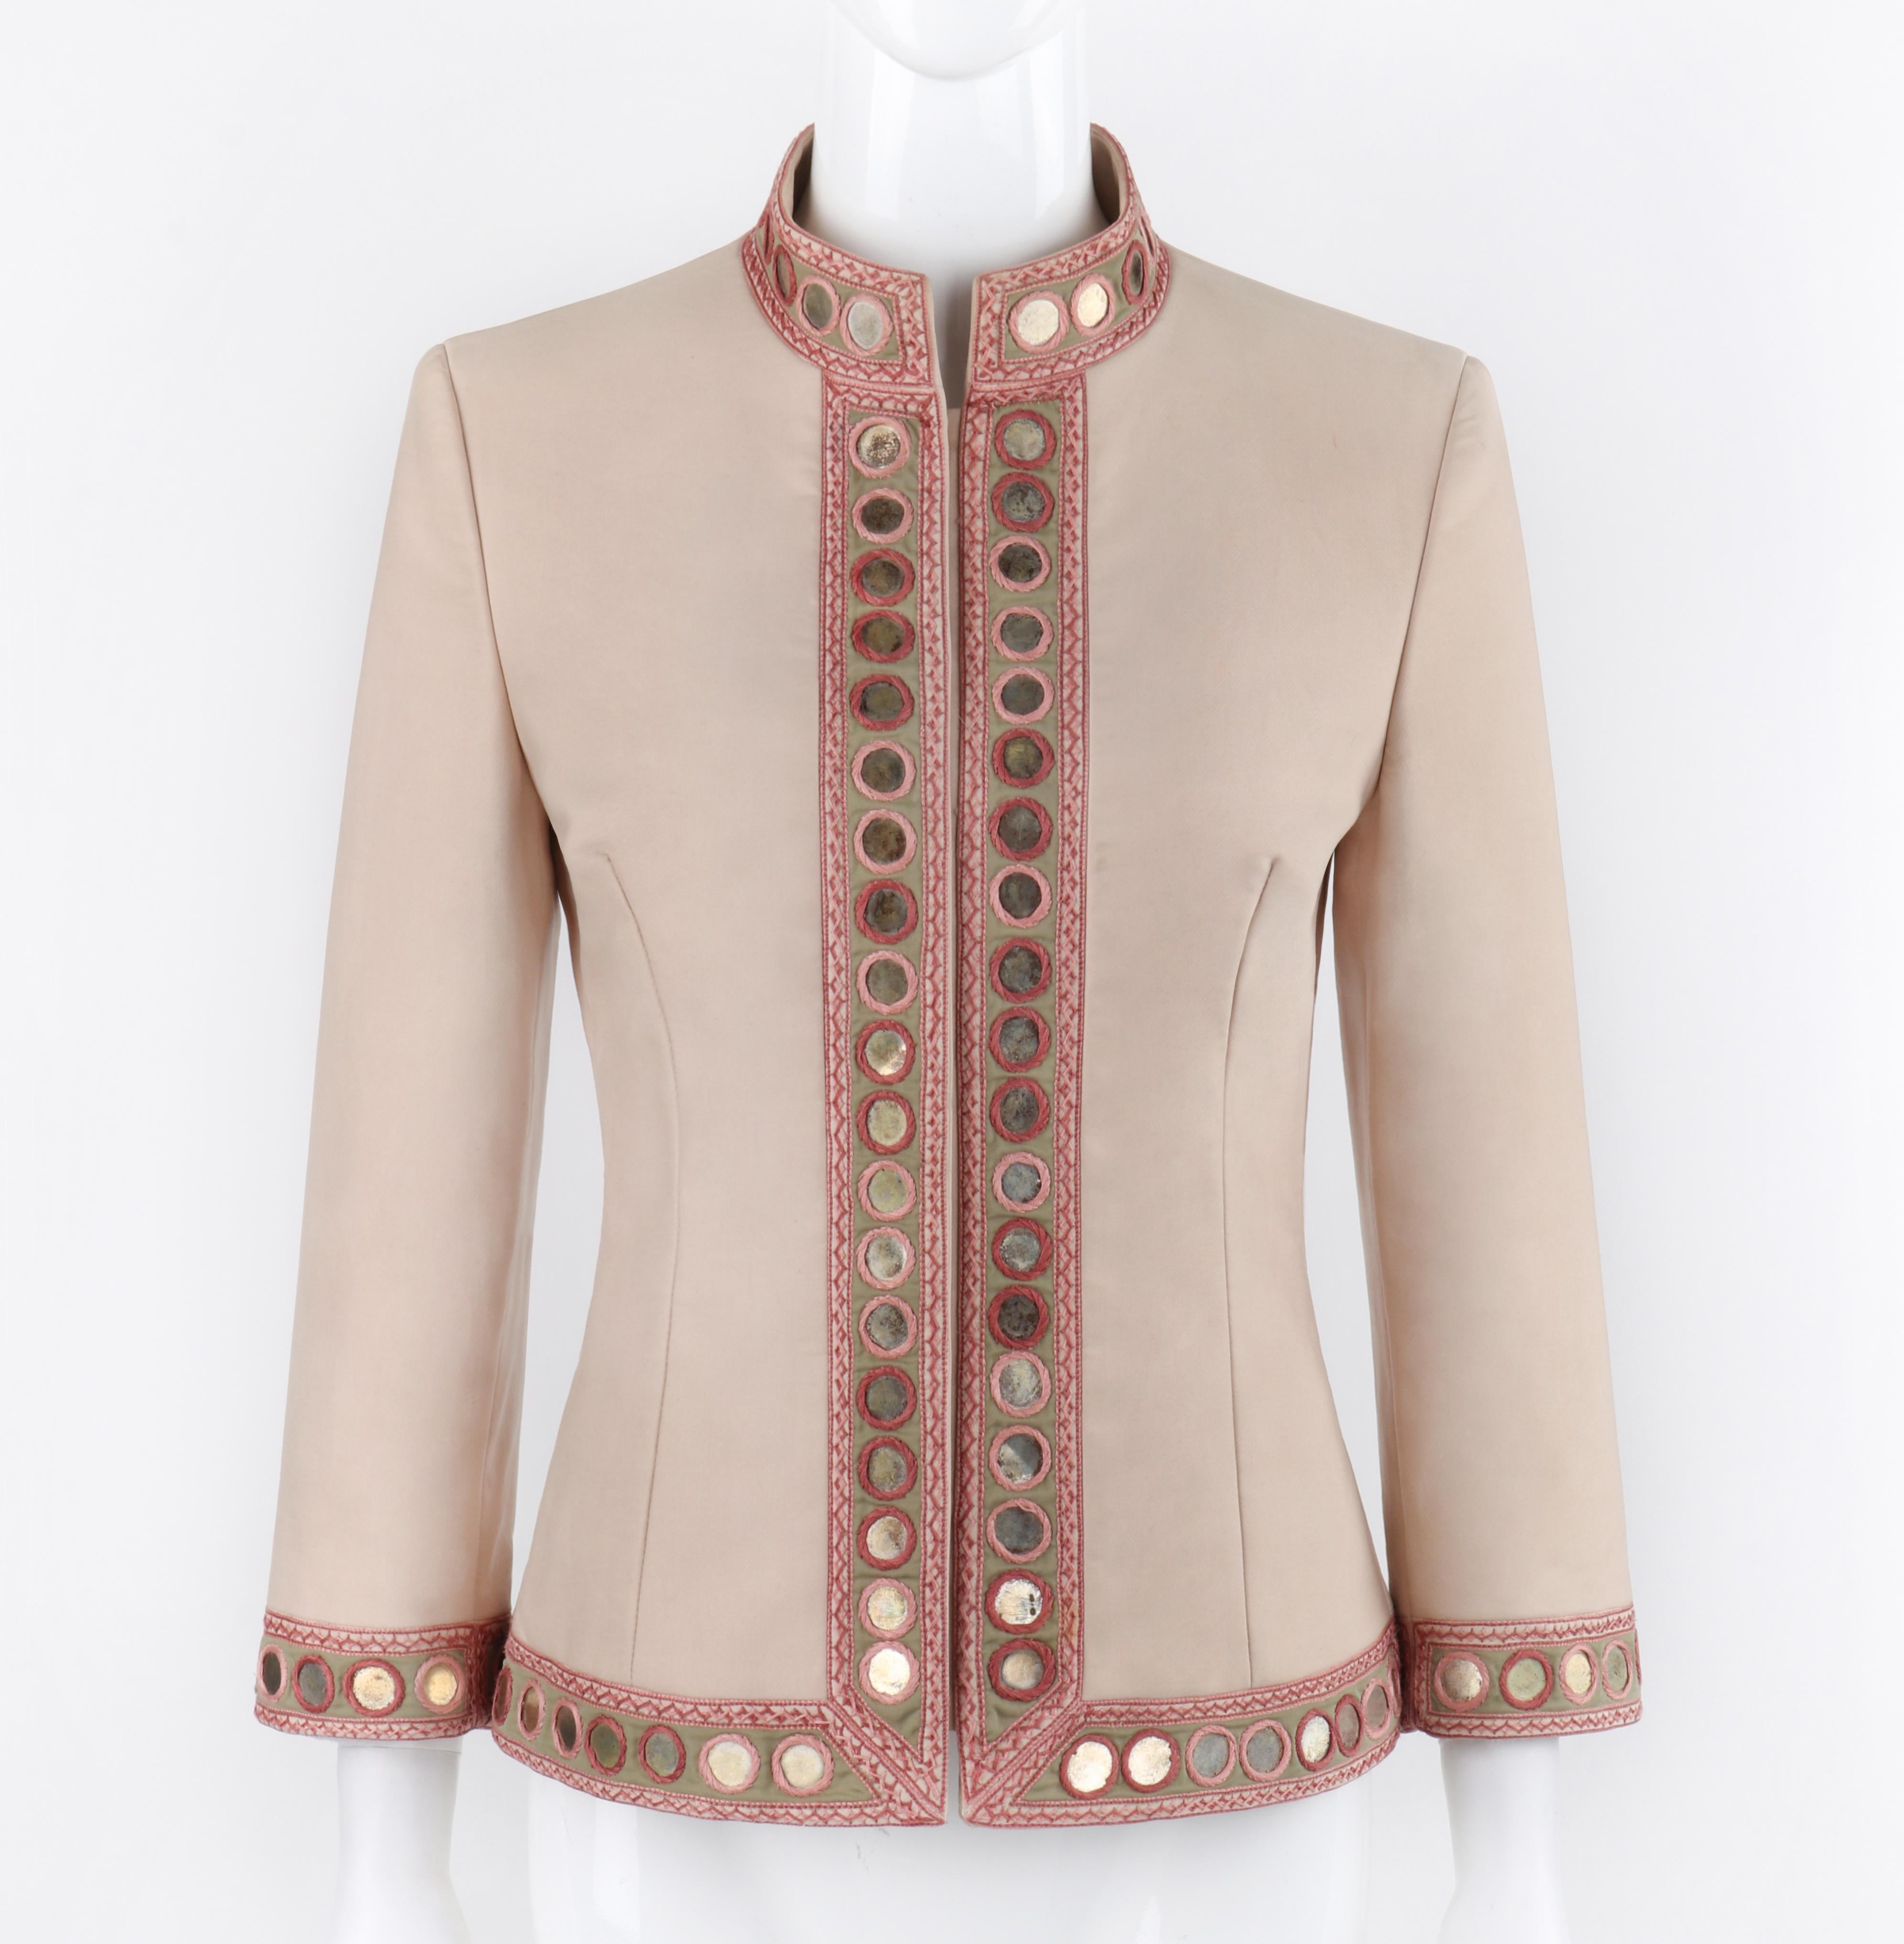 ALEXANDER McQUEEN S/S 2005 Beige Pink Gold Coin Embroidered Collared Button Up Jacket

Brand / Manufacturer: Alexander McQueen
Collection: Spring / Summer 2005
Designer: Alexander McQueen
Style: Jacket
Color(s): Shades of pink, beige, gold, and